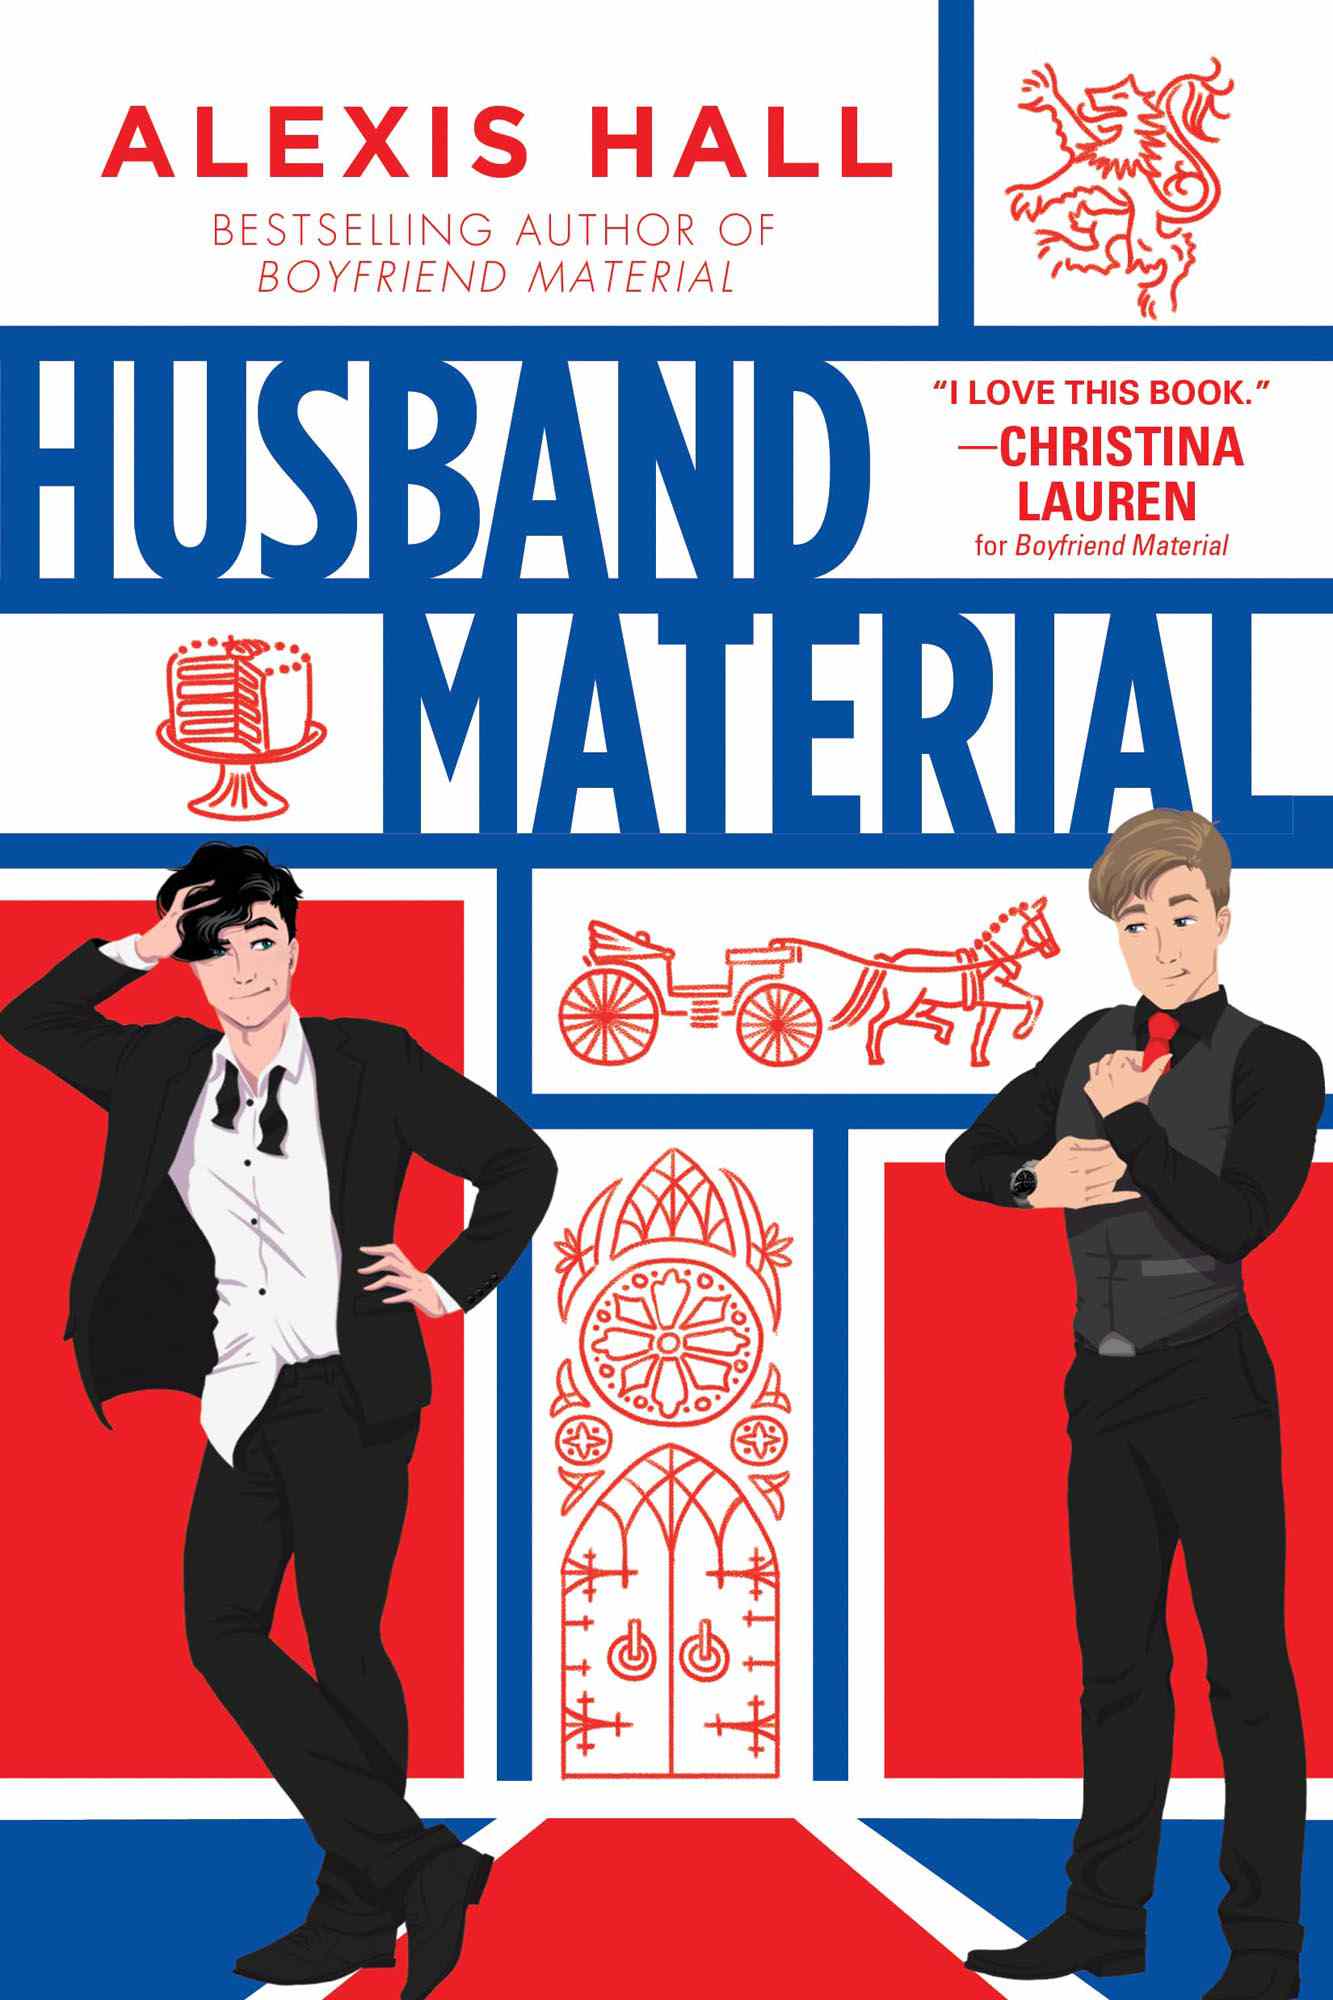 Husband Material by Alexis Hall